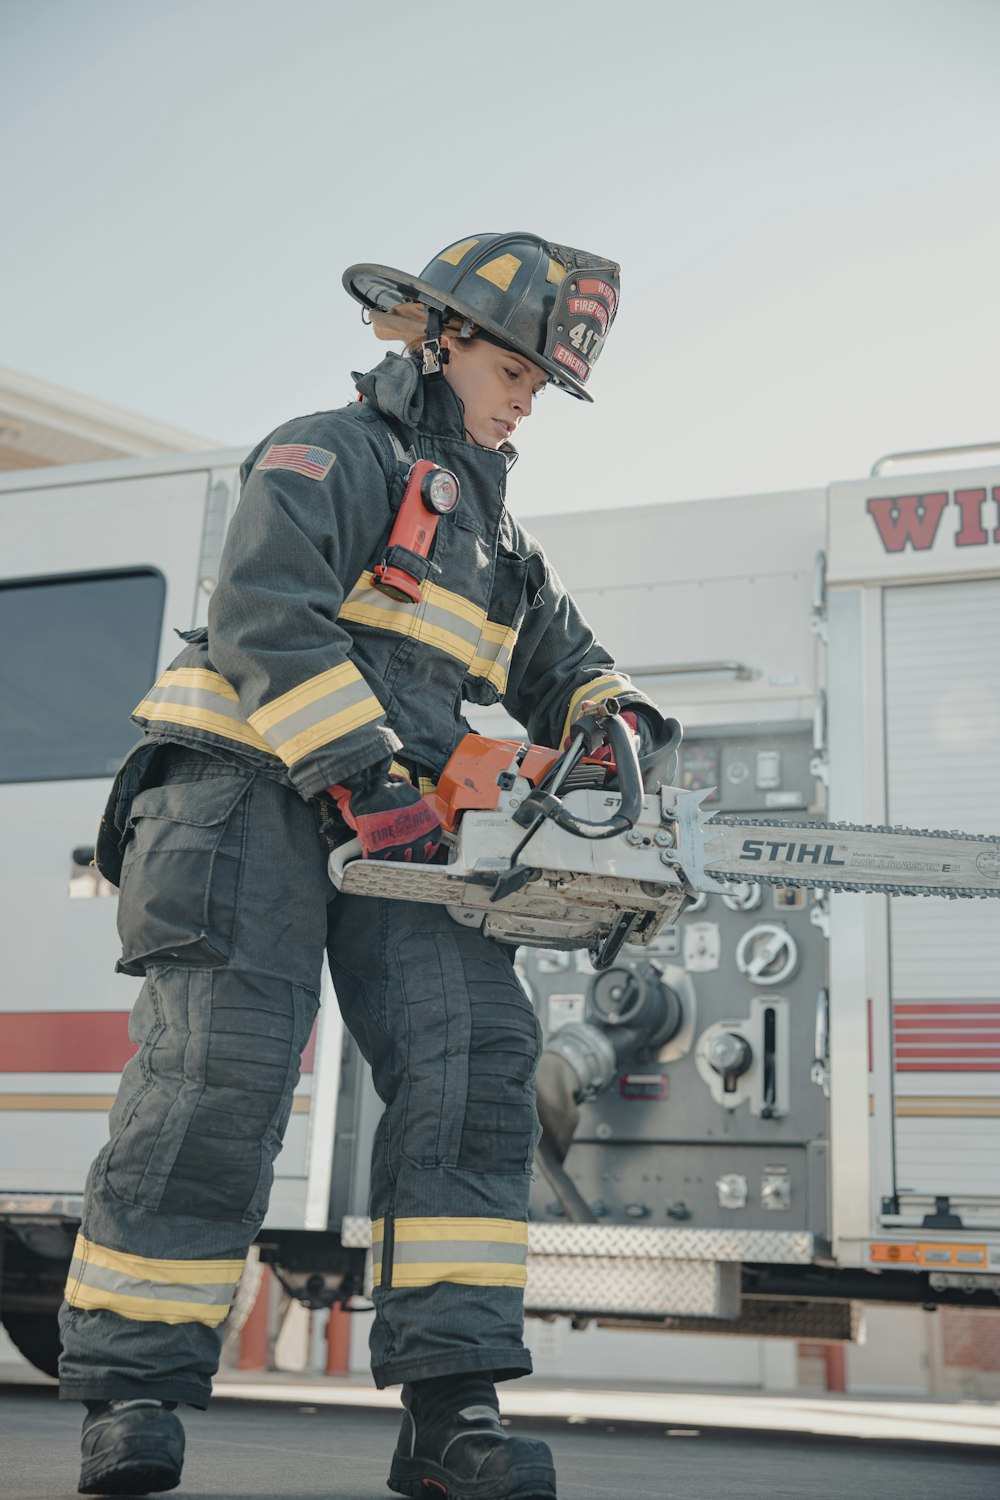 a firefighter standing in front of a fire truck